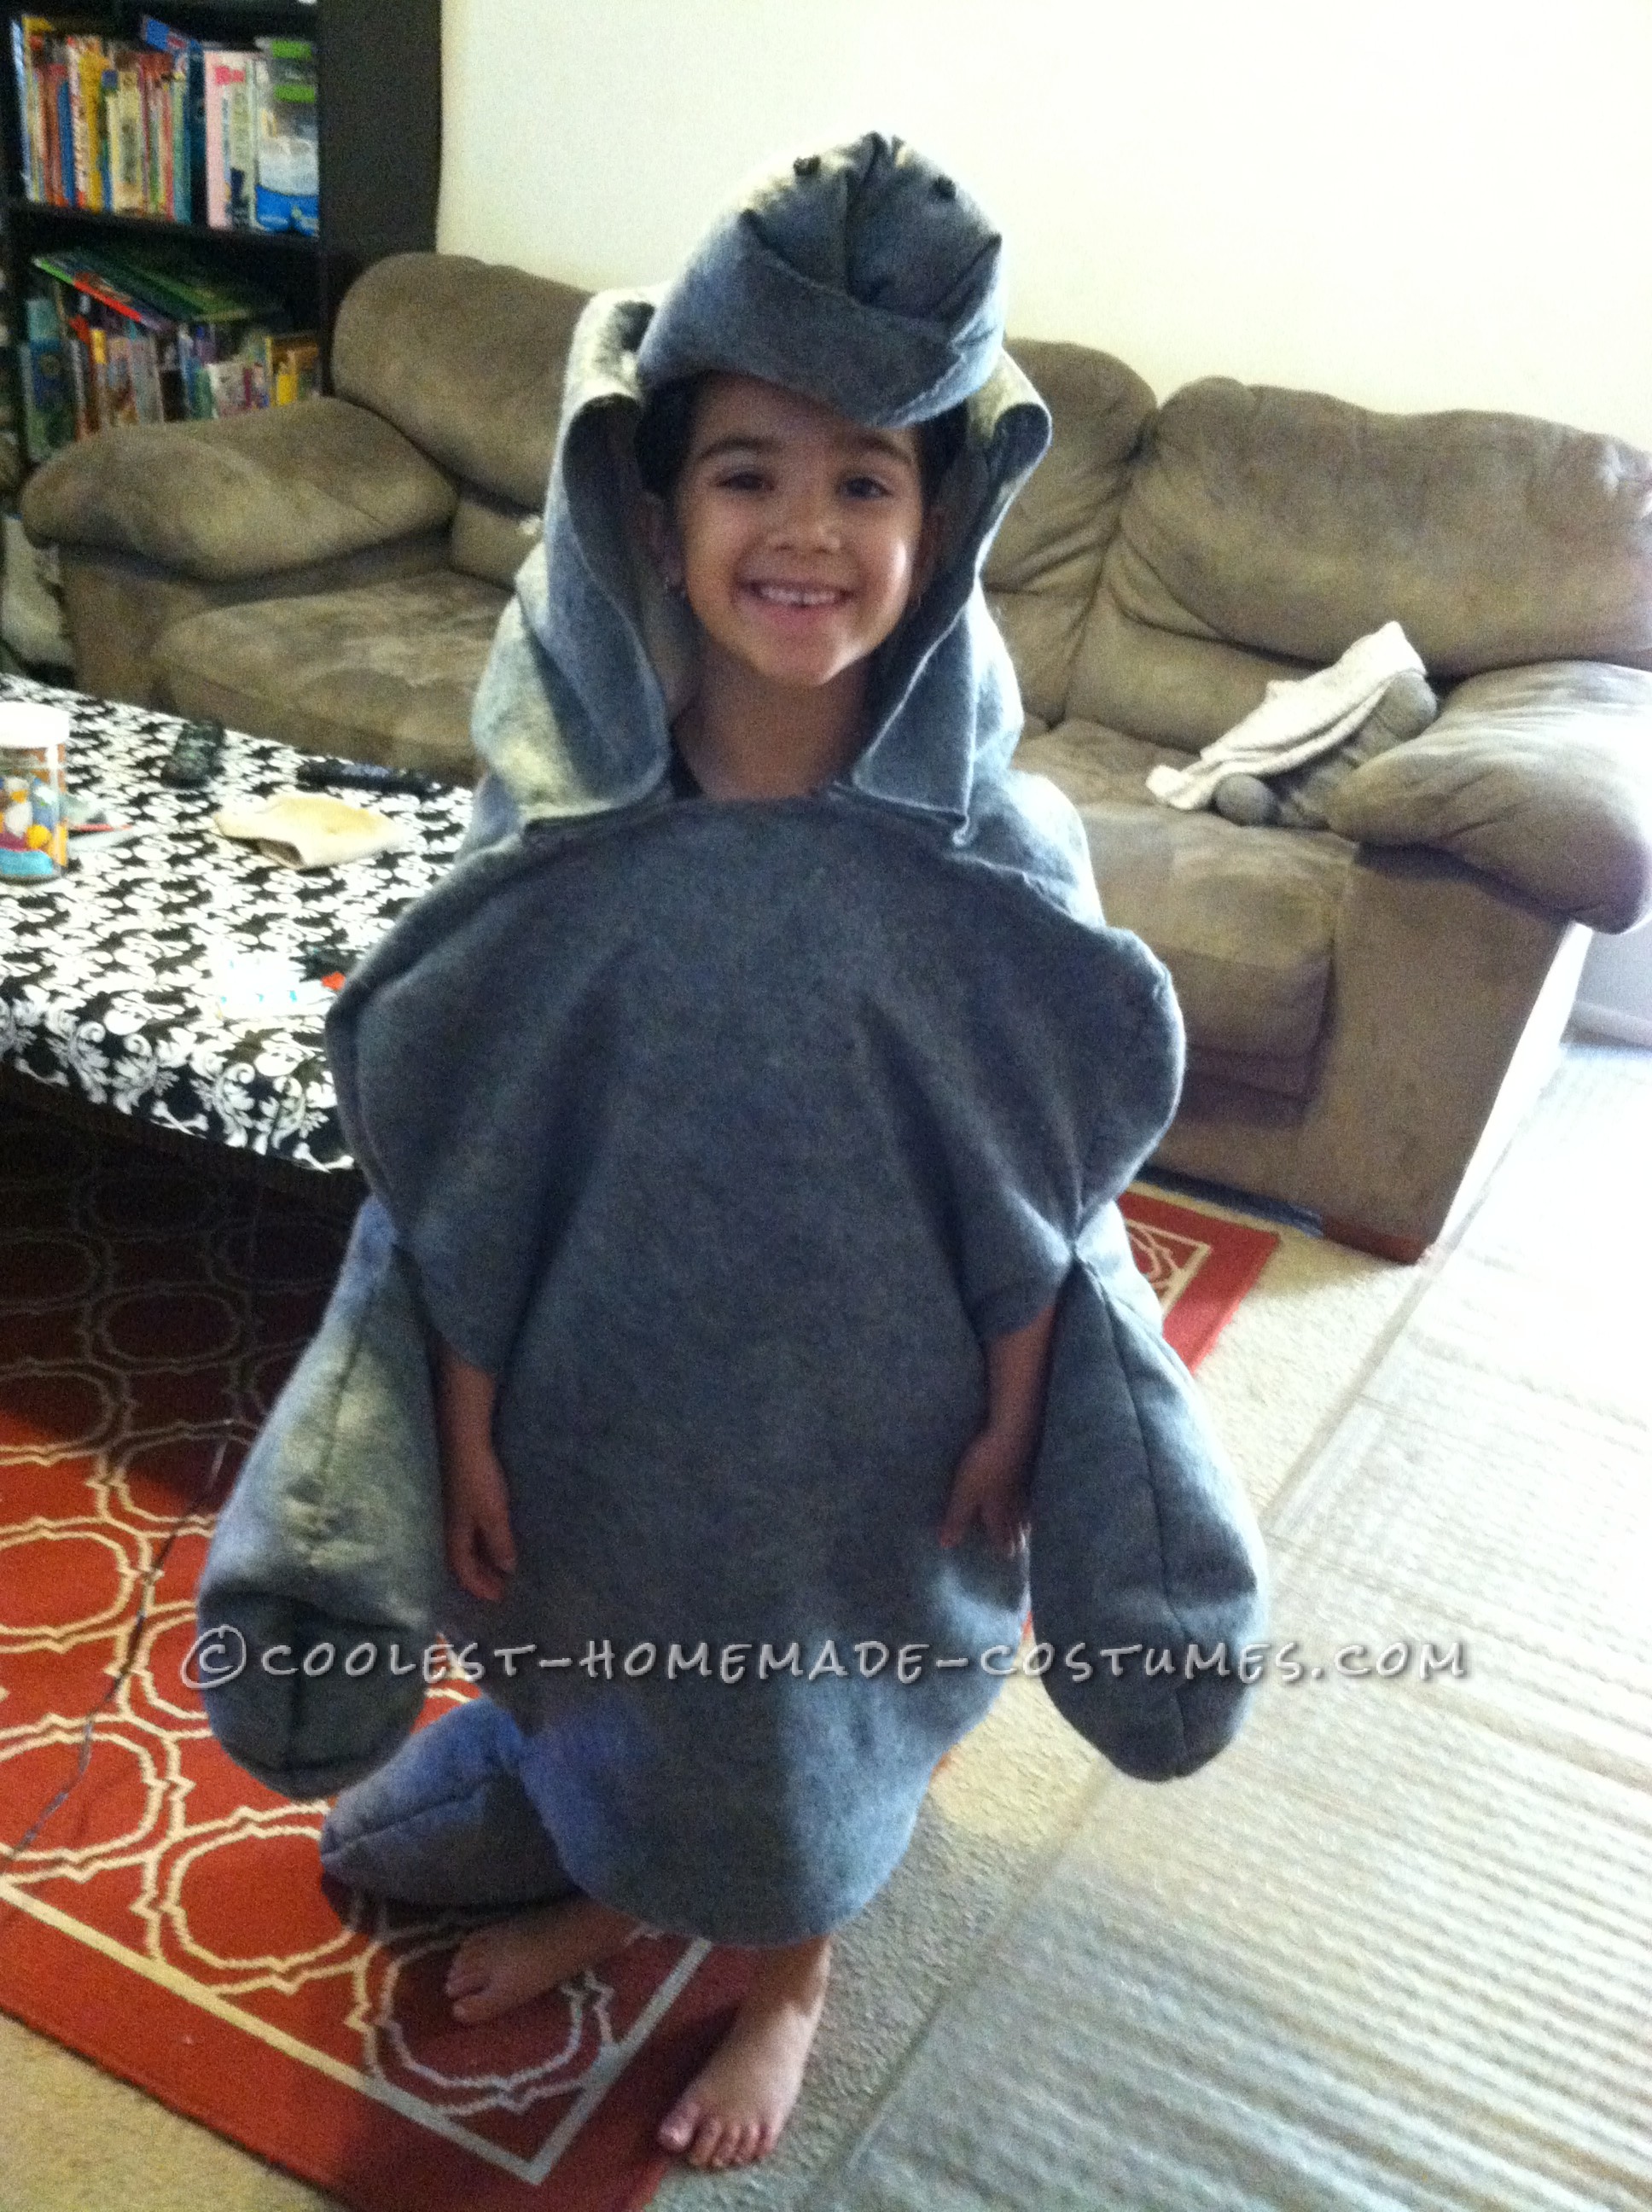 Coolest Homemade Manatee Costume For a Child